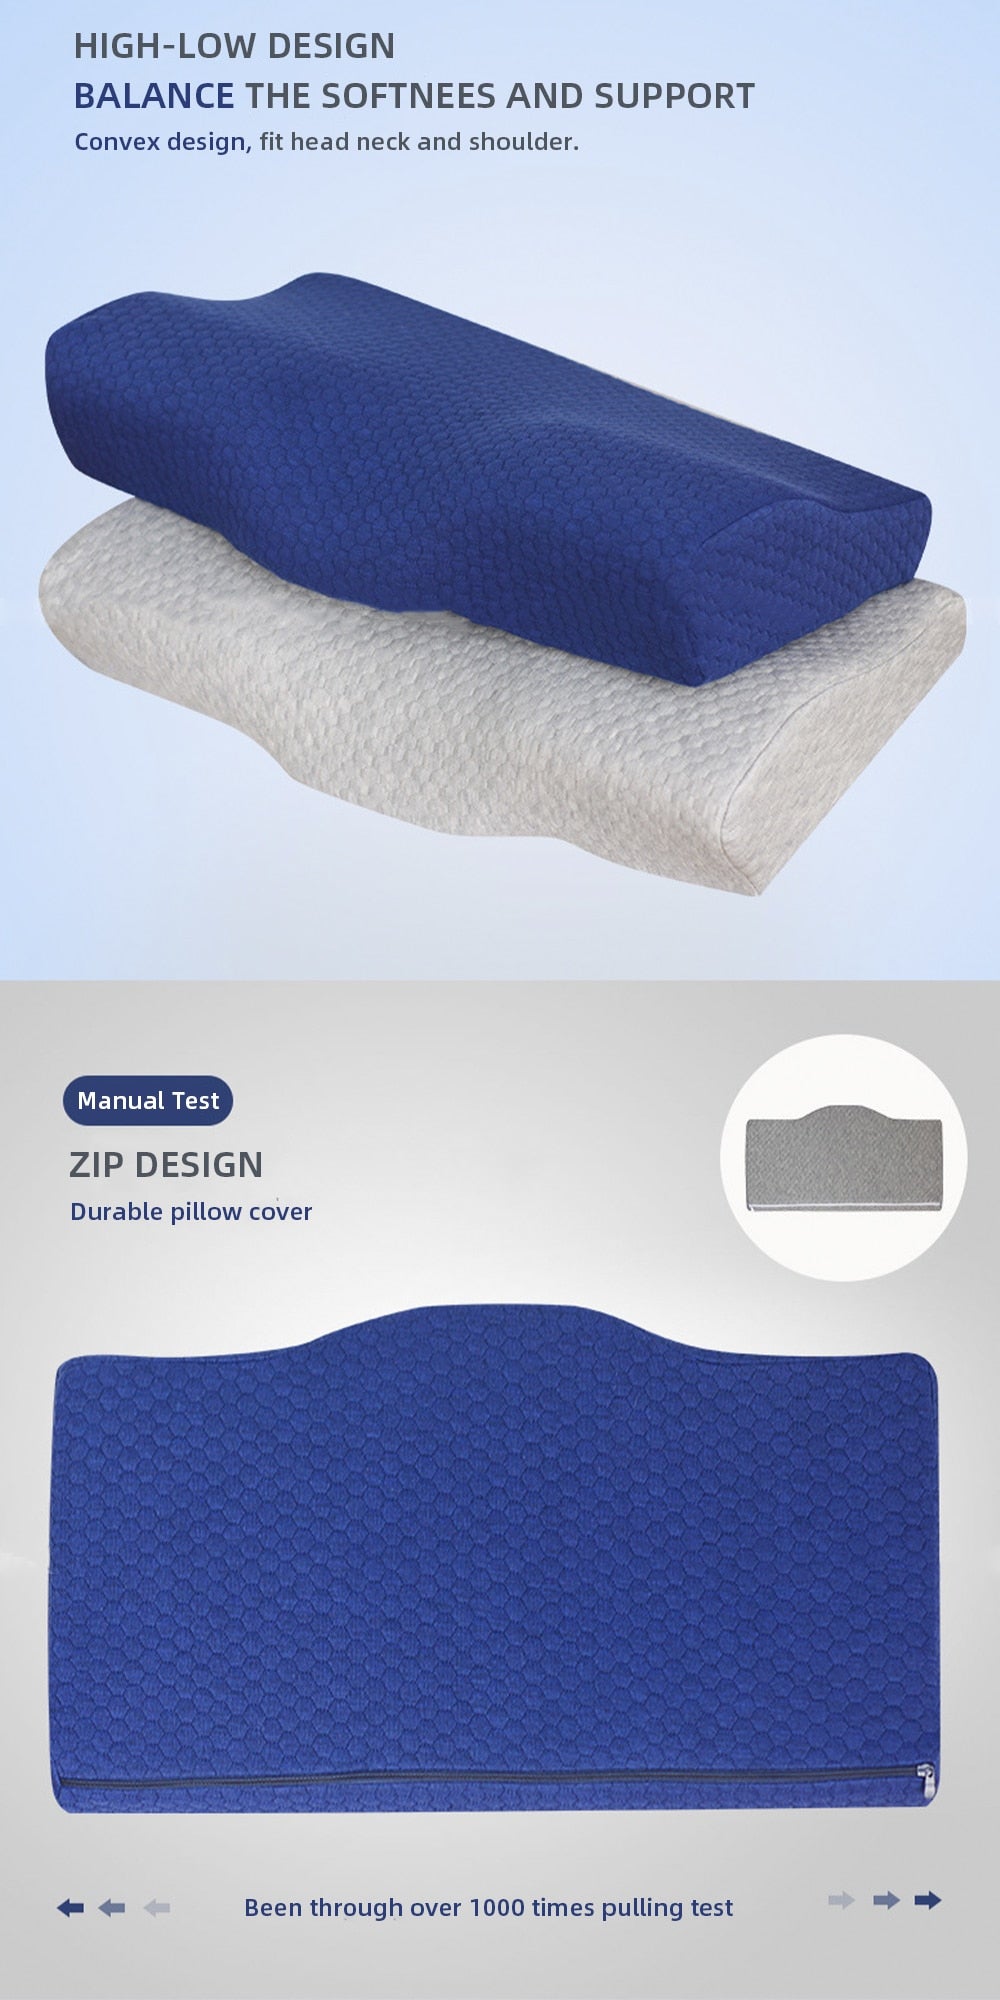 SoftSleeper® Orthopedic Memory Foam Pillow - The Perfect Support for a Restful Night's Sleep